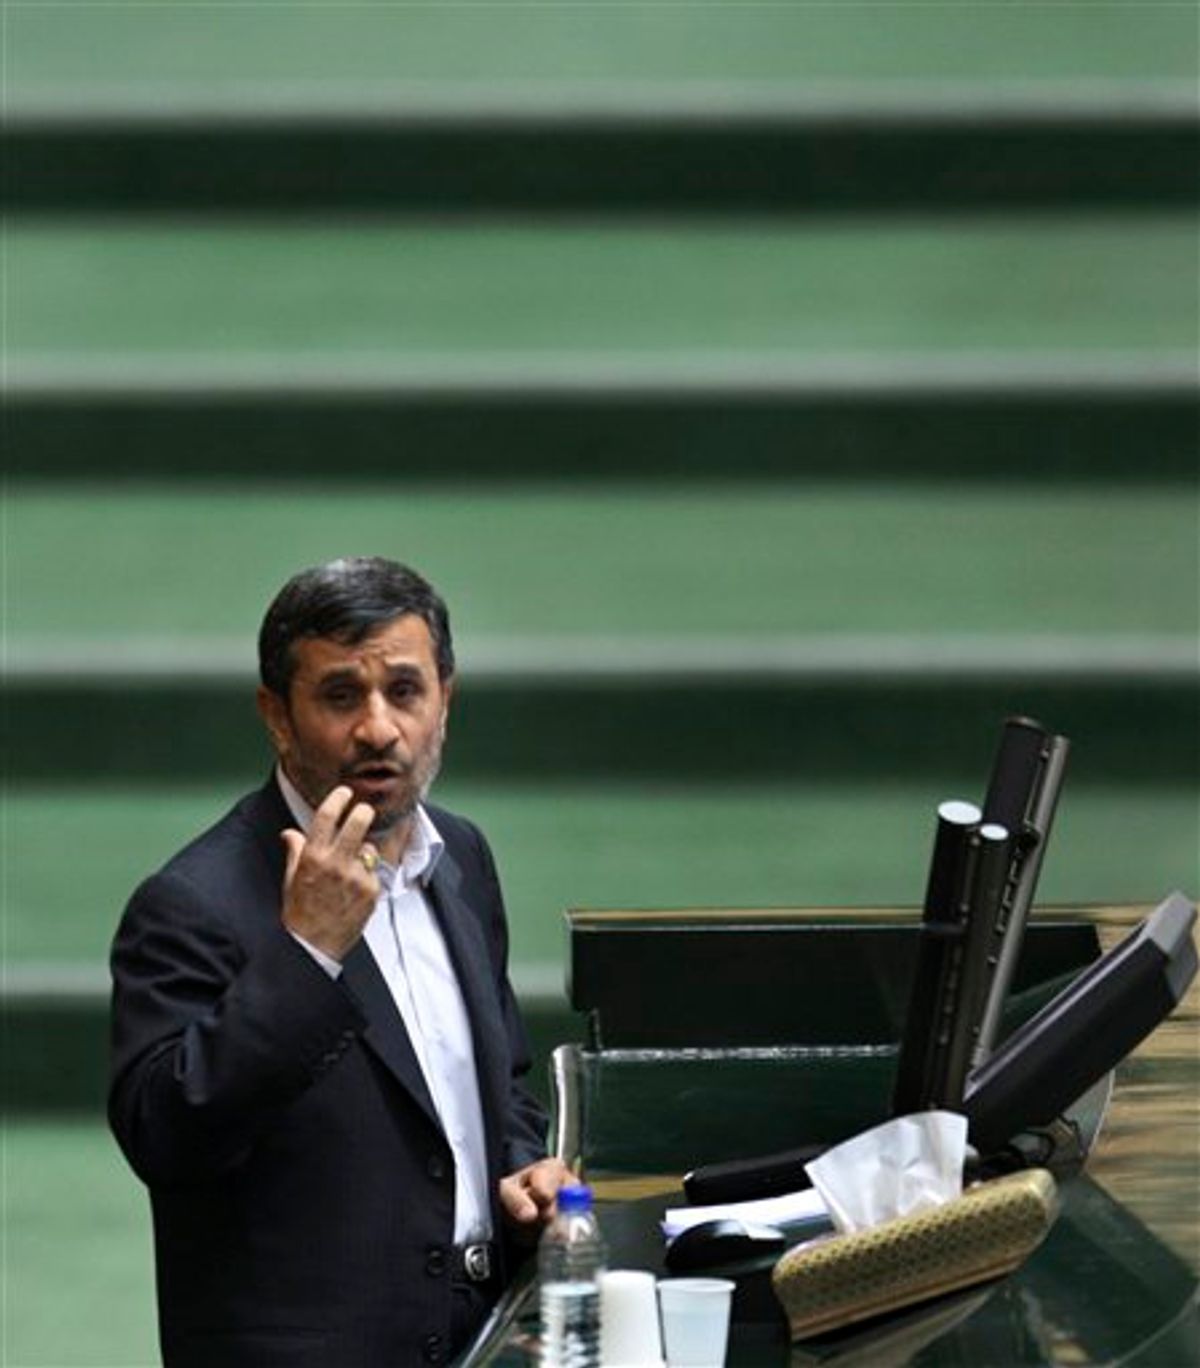 Iranian President Mahmoud Ahmadinejad delivers his speech during the debate for a vote of confidence in Ahmadinejad's choice for new Foreign Minister, who is Head of Iran's Atomic Energy Organization, Ali Akbar Salehi,  during an open session of parliament, in Tehran, Iran, Sunday, Jan. 30, 2011.  Iran's lawmakers approved Ahmadinejad's choice of Salehi for foreign minister, indicating the importance that the country's nuclear program has for its international diplomacy. (AP Photo/Vahid Salemi) (AP)